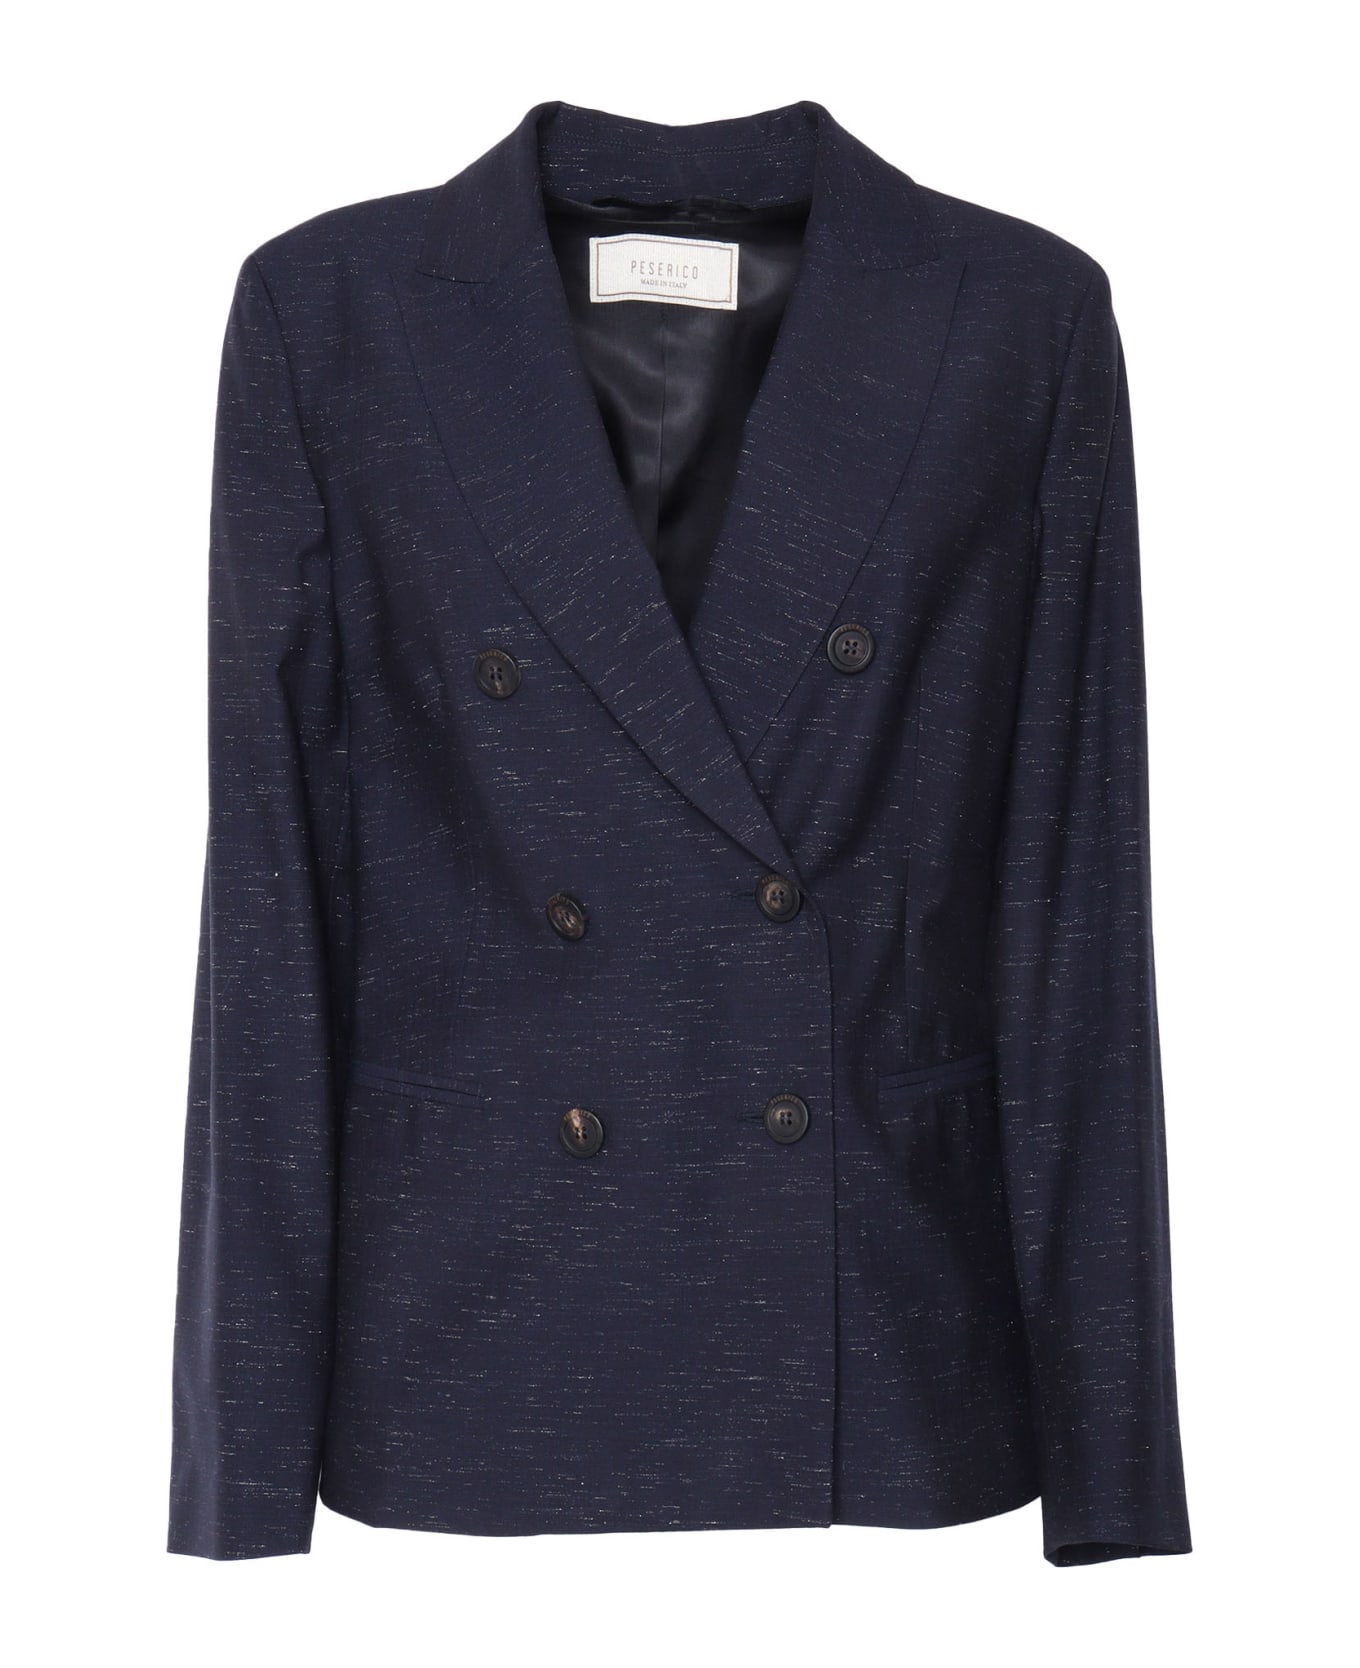 Peserico Blue Double-breasted Blazer - BLUE ブレザー